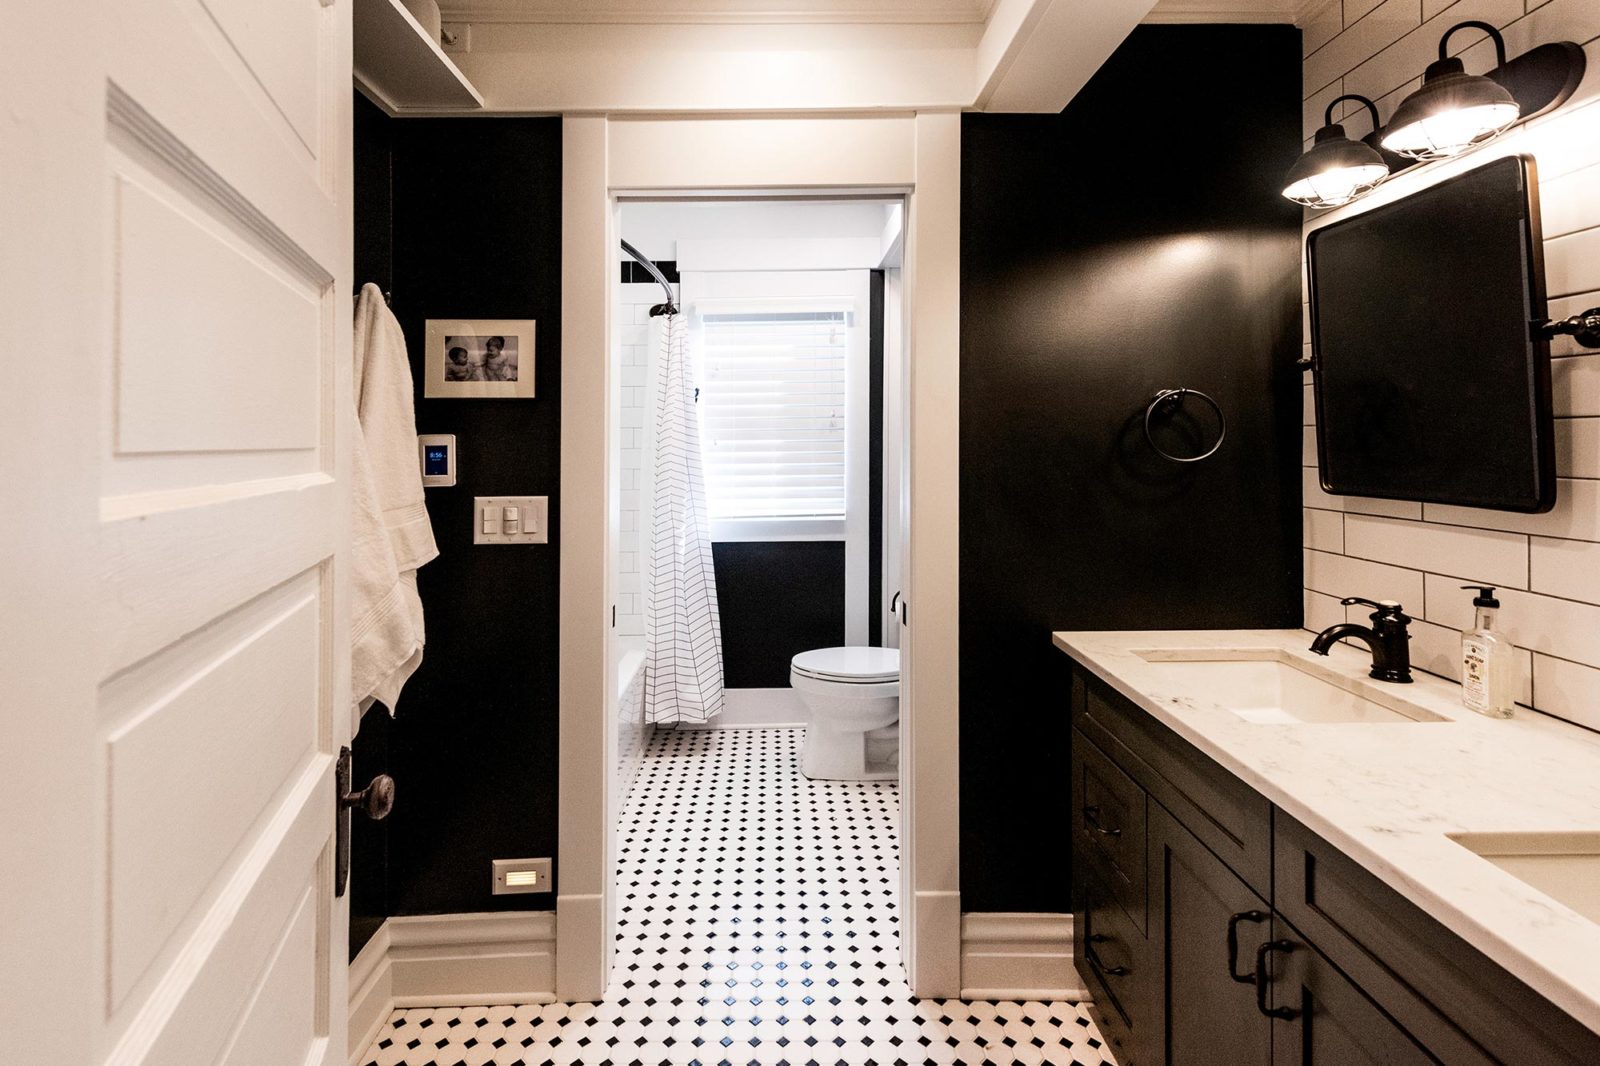 Bathroom with black walls & white trim, toilet, shower, white sinks with mirrors, window, tile floor